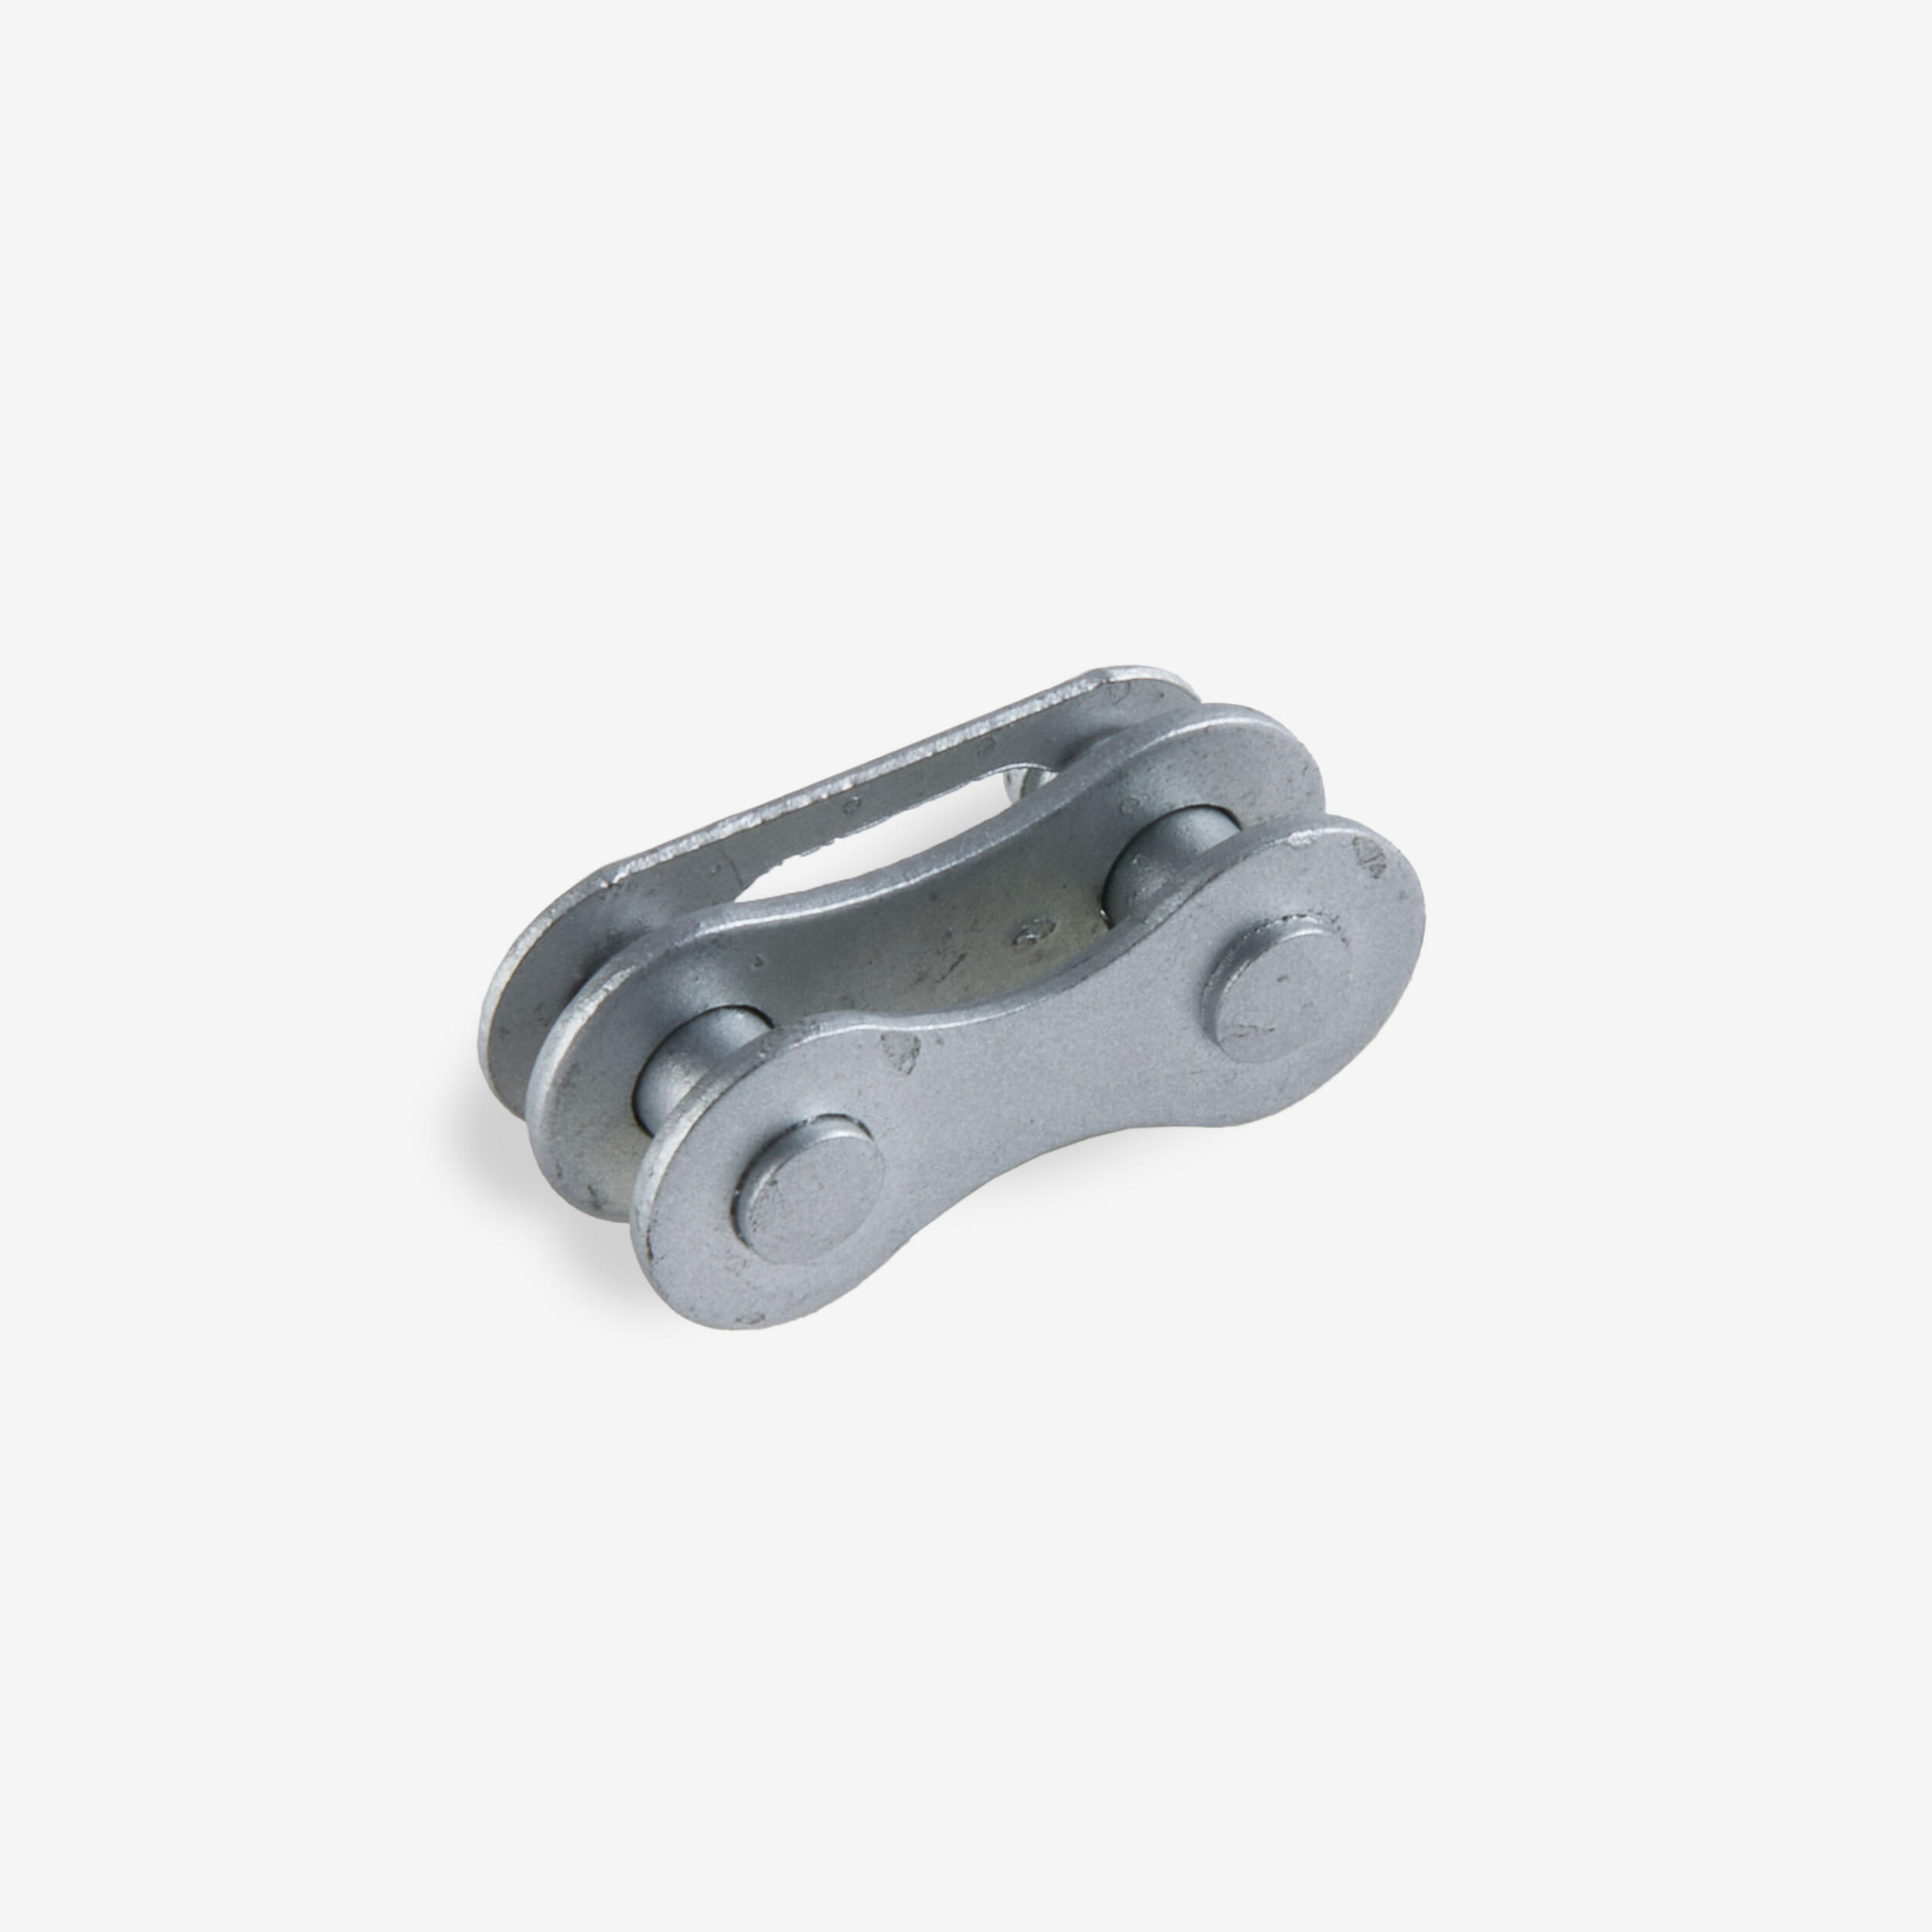 DECATHLON Quick Release Links for 1-speed Bike Chain x 2